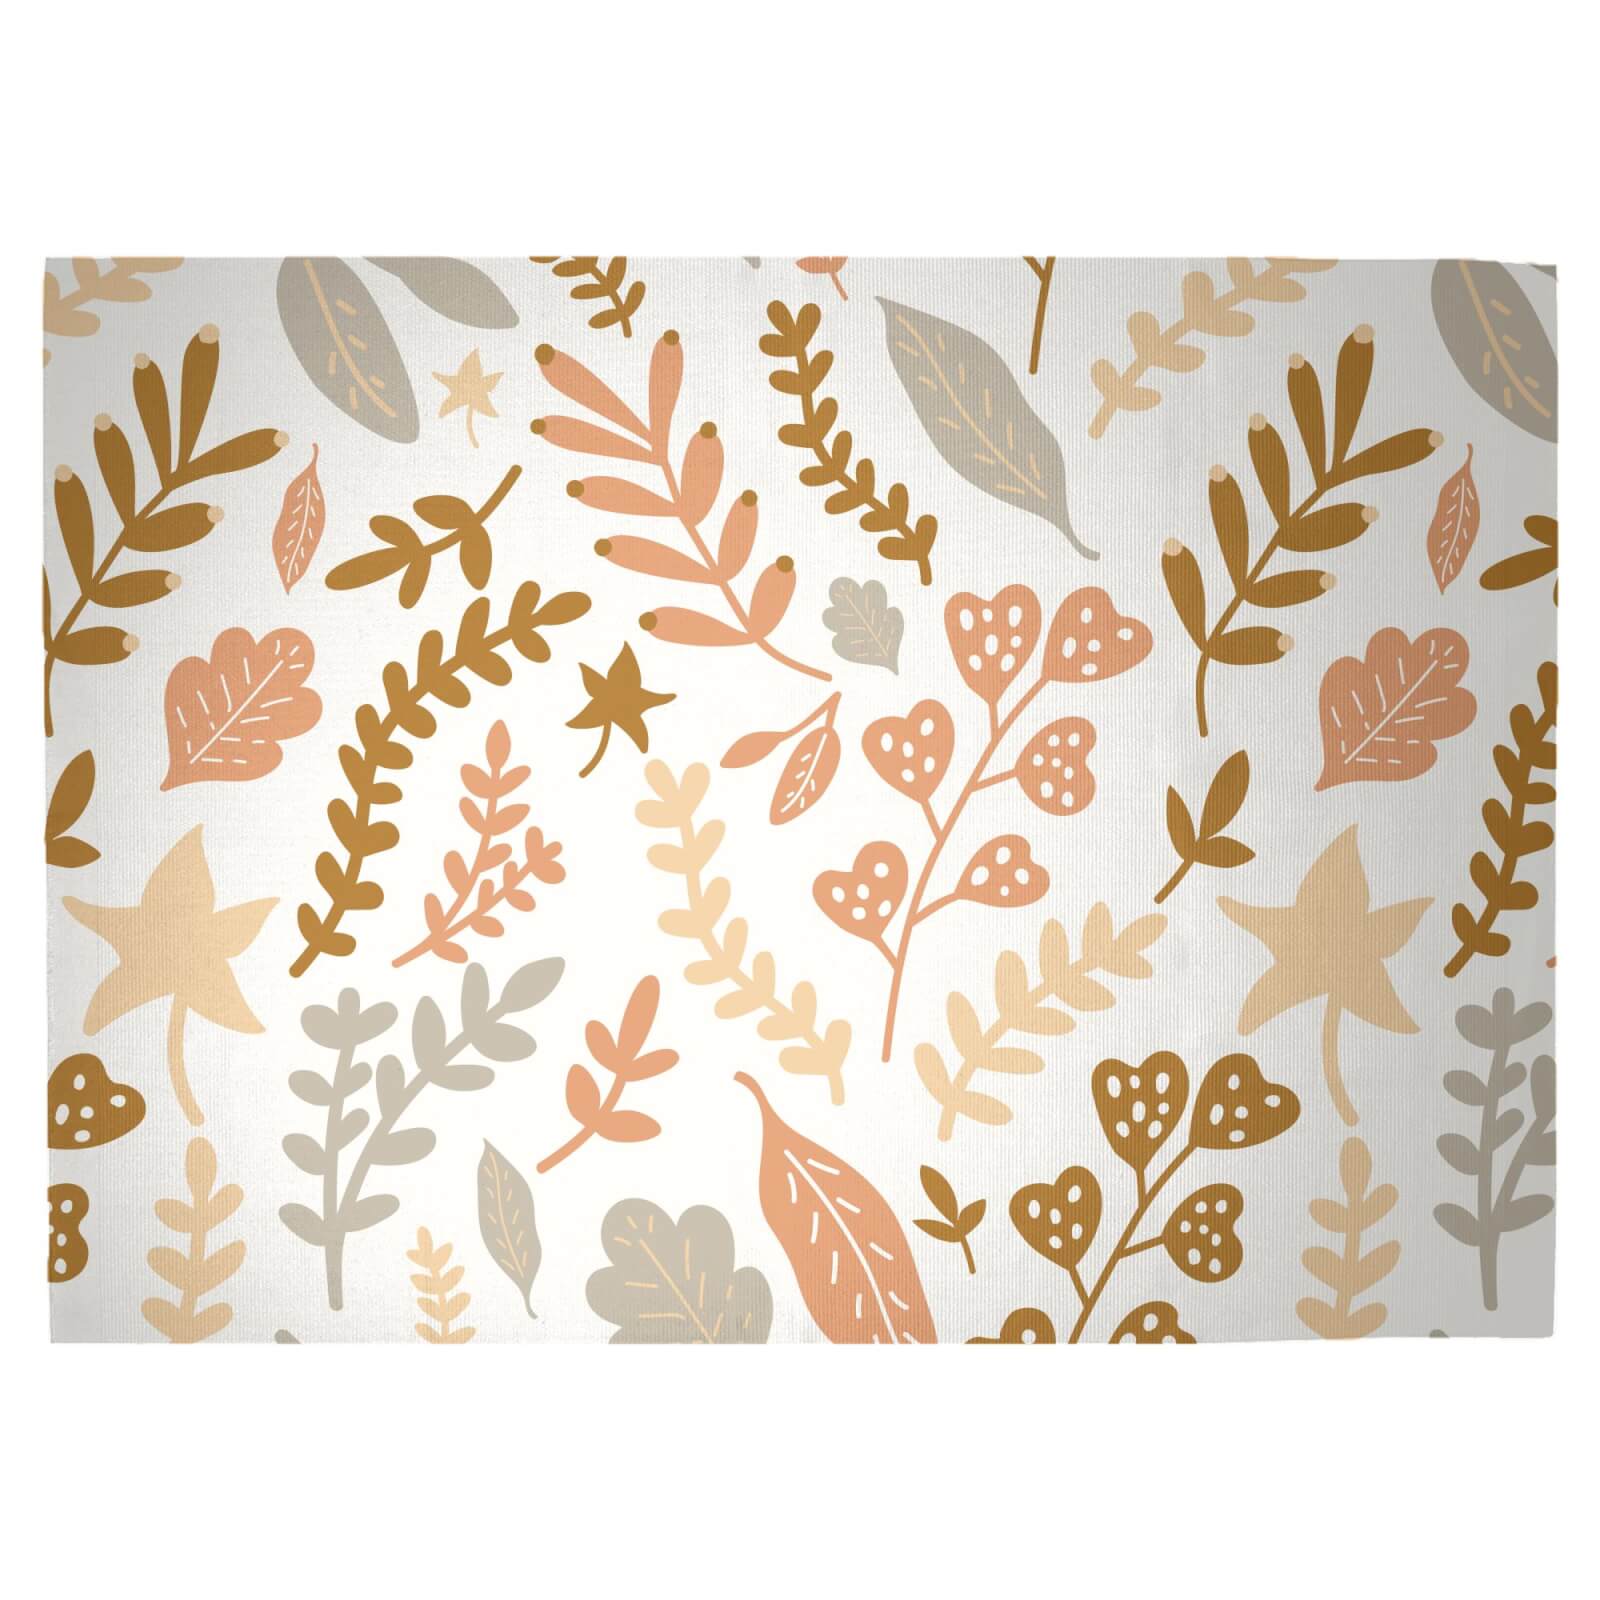 Mixed Leaves Woven Rug - Large